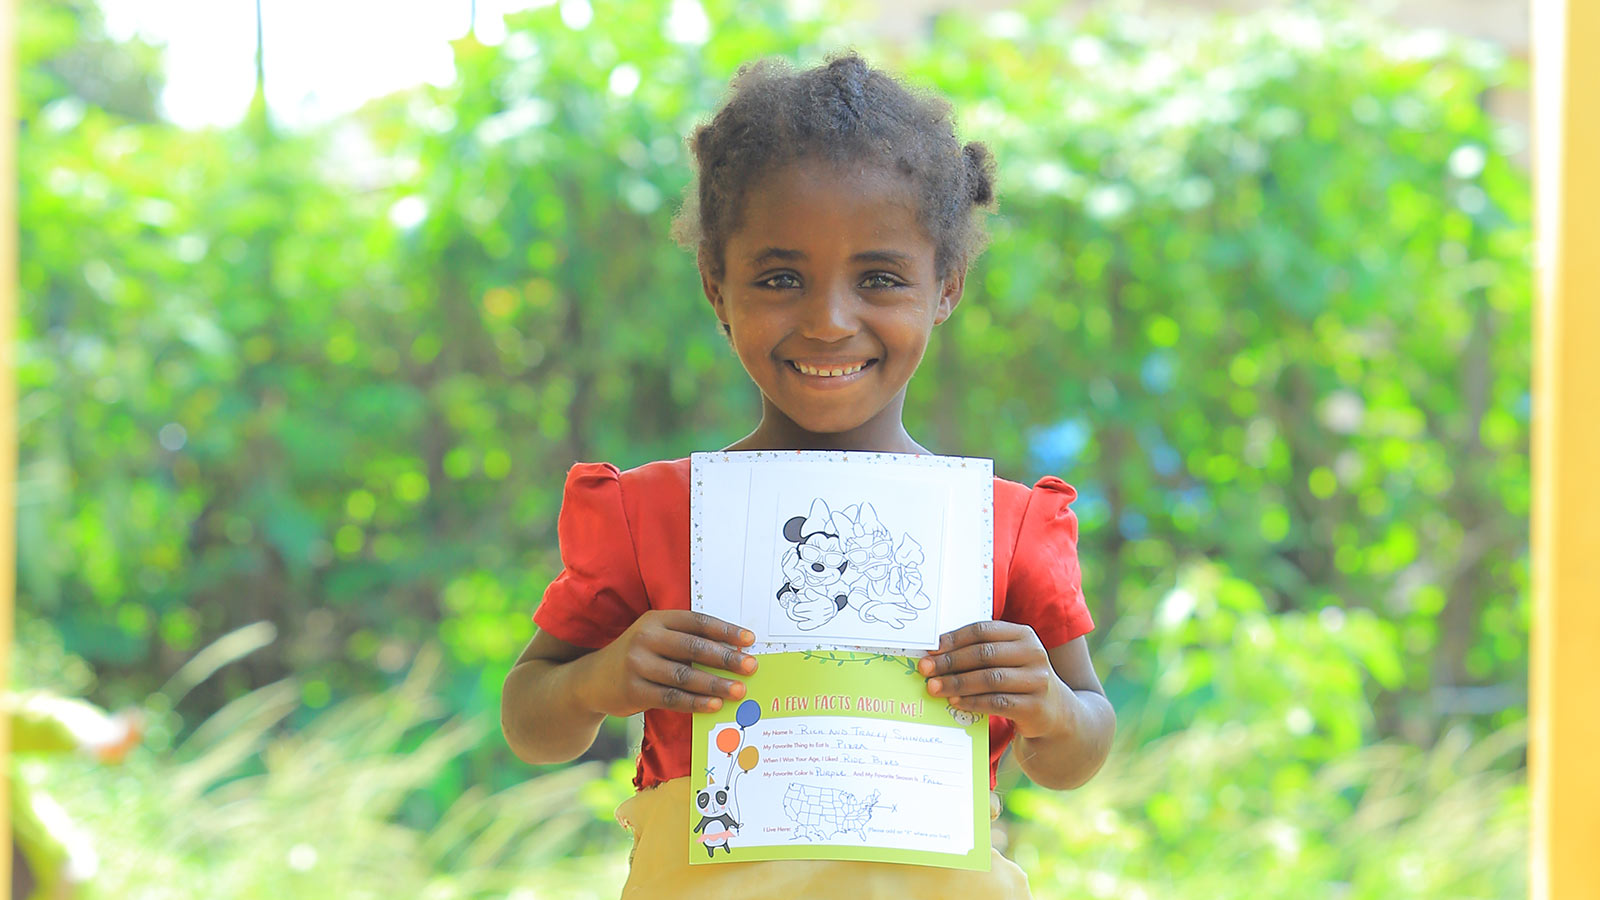 sponsored child smiling with birthday card from sponsor